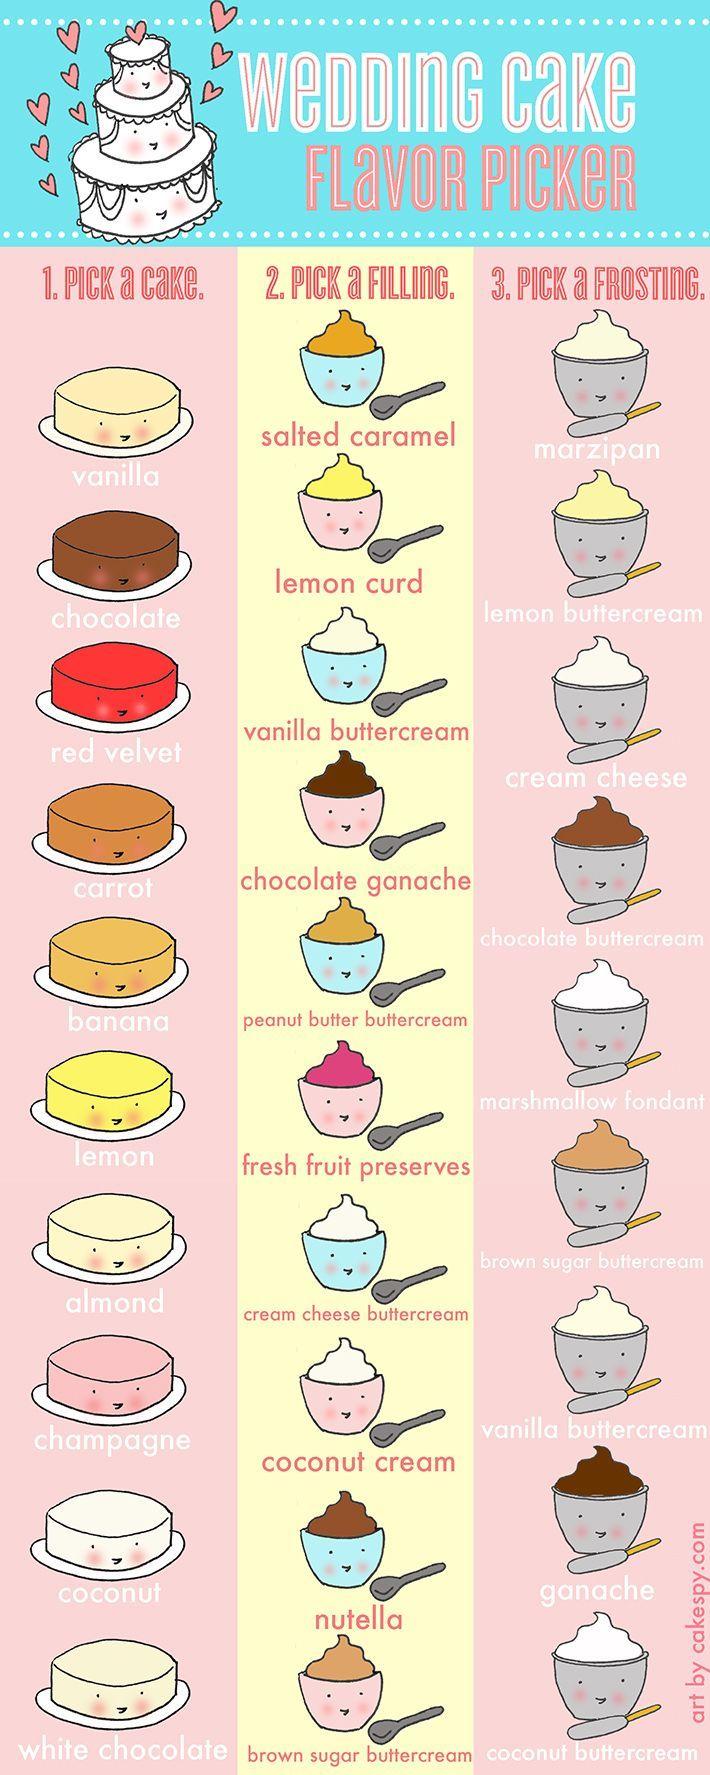 Wedding - A Fun Wedding Cake Flavors Infographic - On Craftsy!